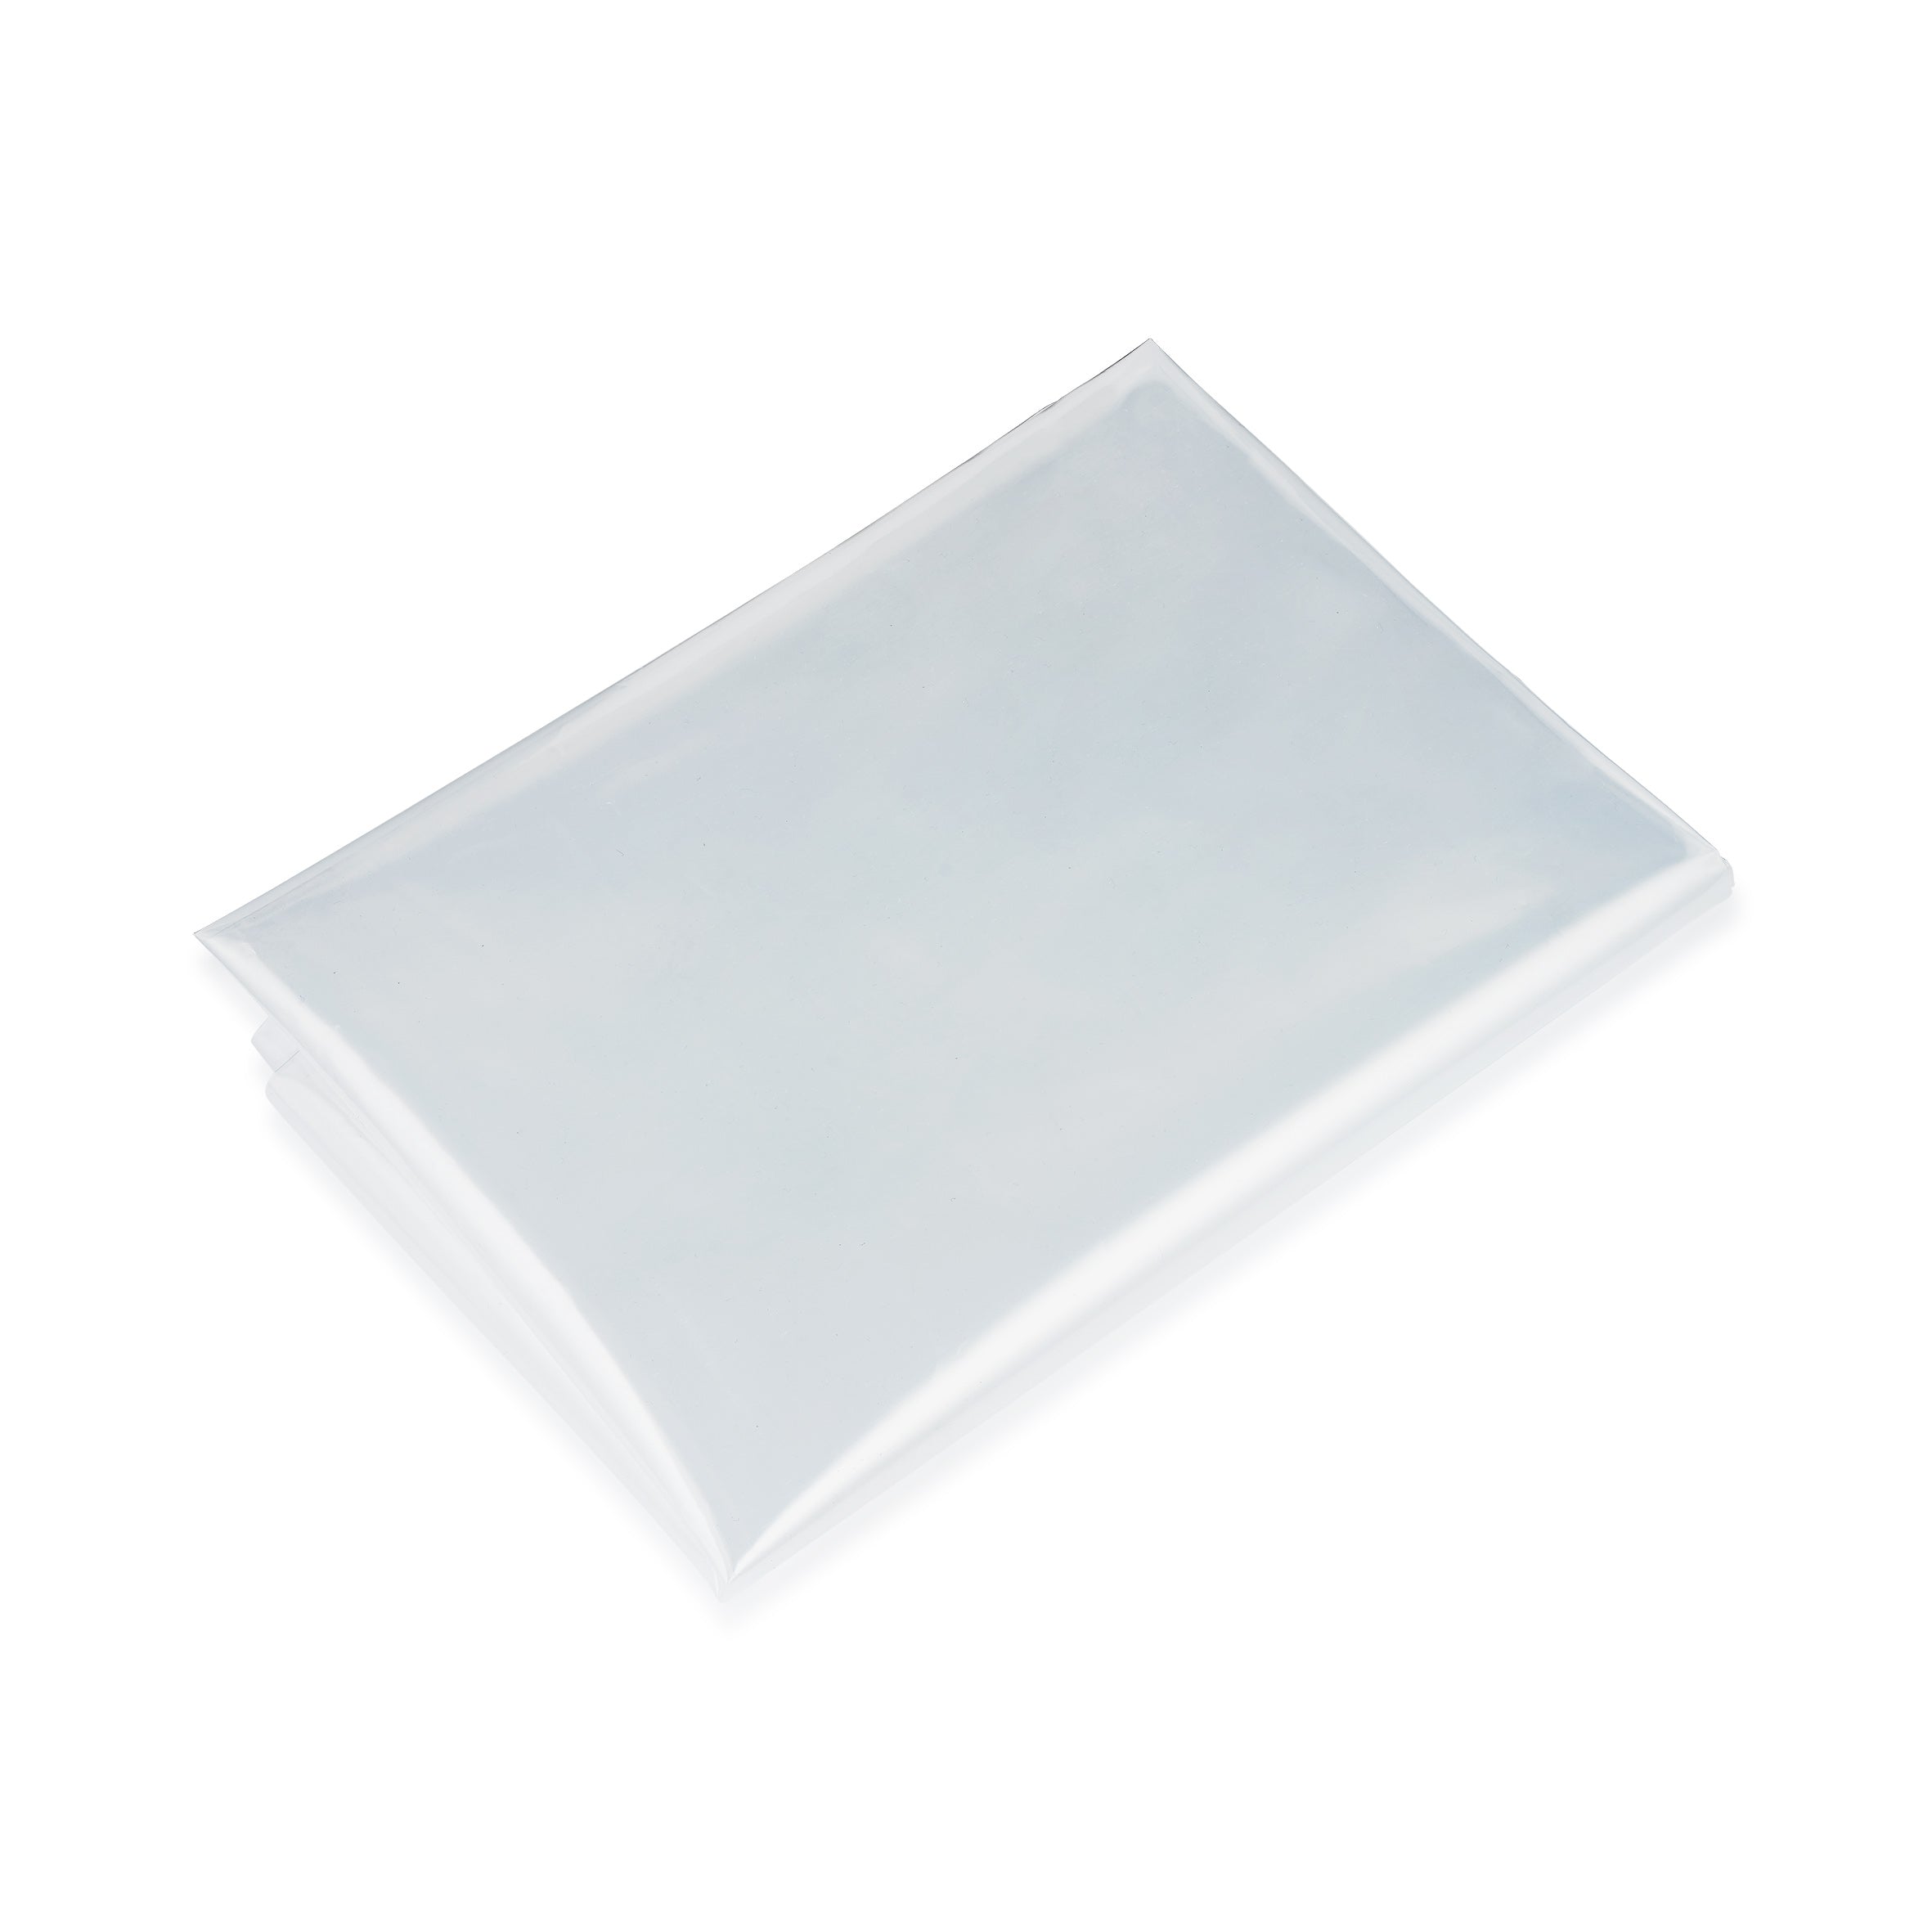 Dust Collector Bottom Plastic Bag 50 Pack - Suits UFO-103B